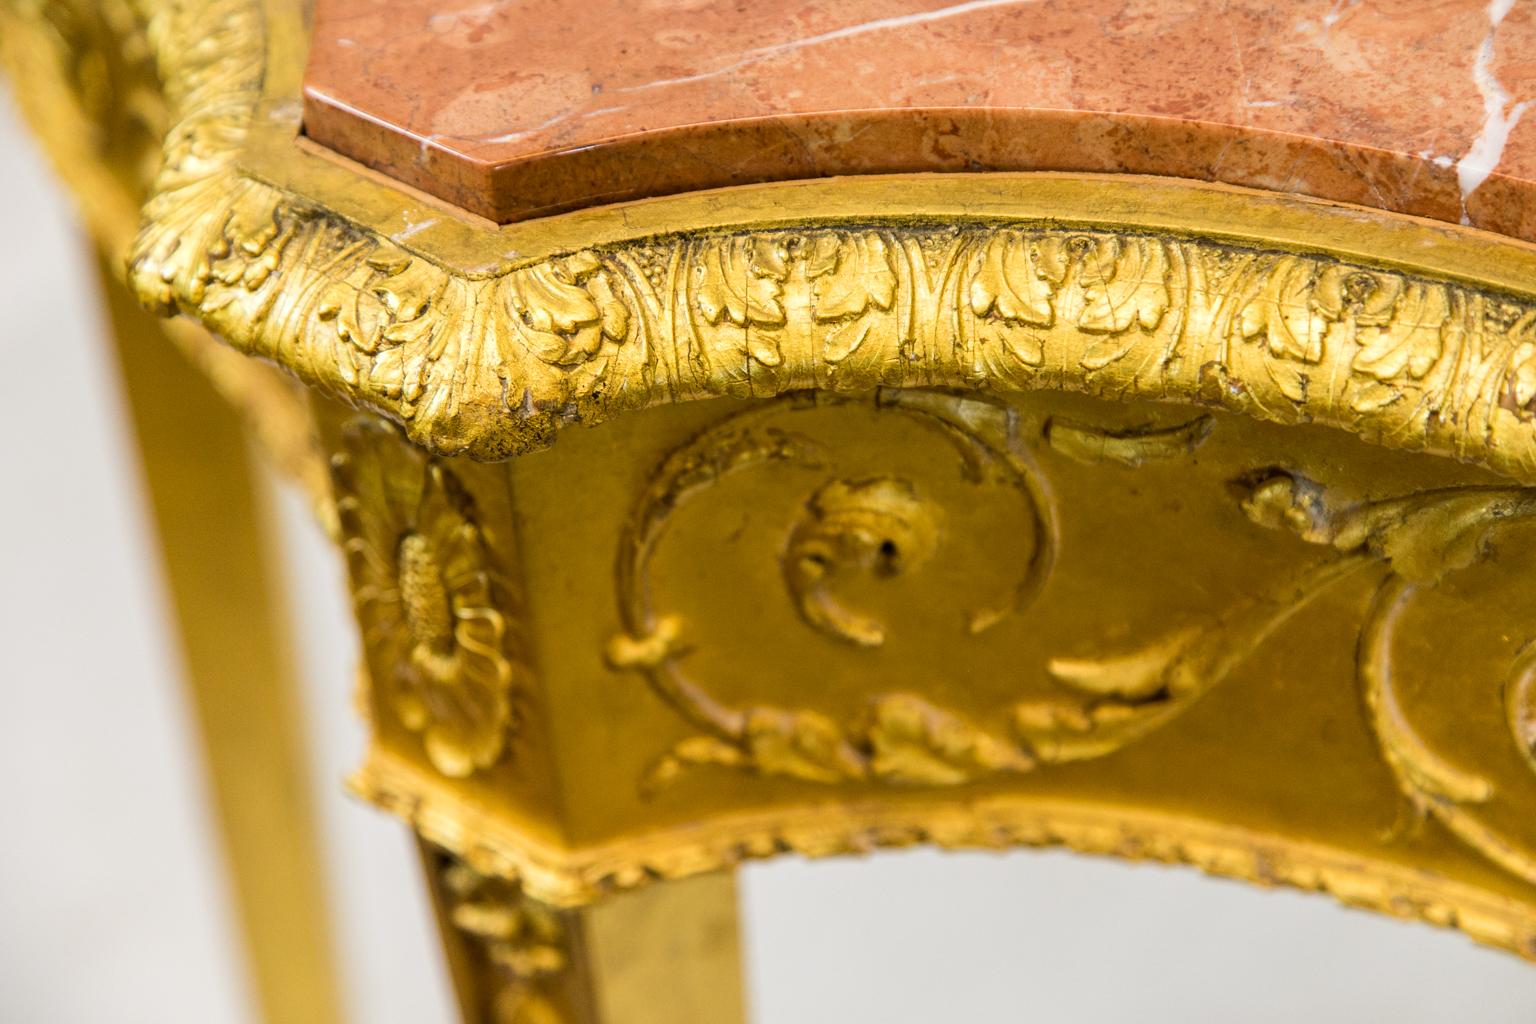 Serpentine English Marble-Top Gilt Console Table For Sale 3